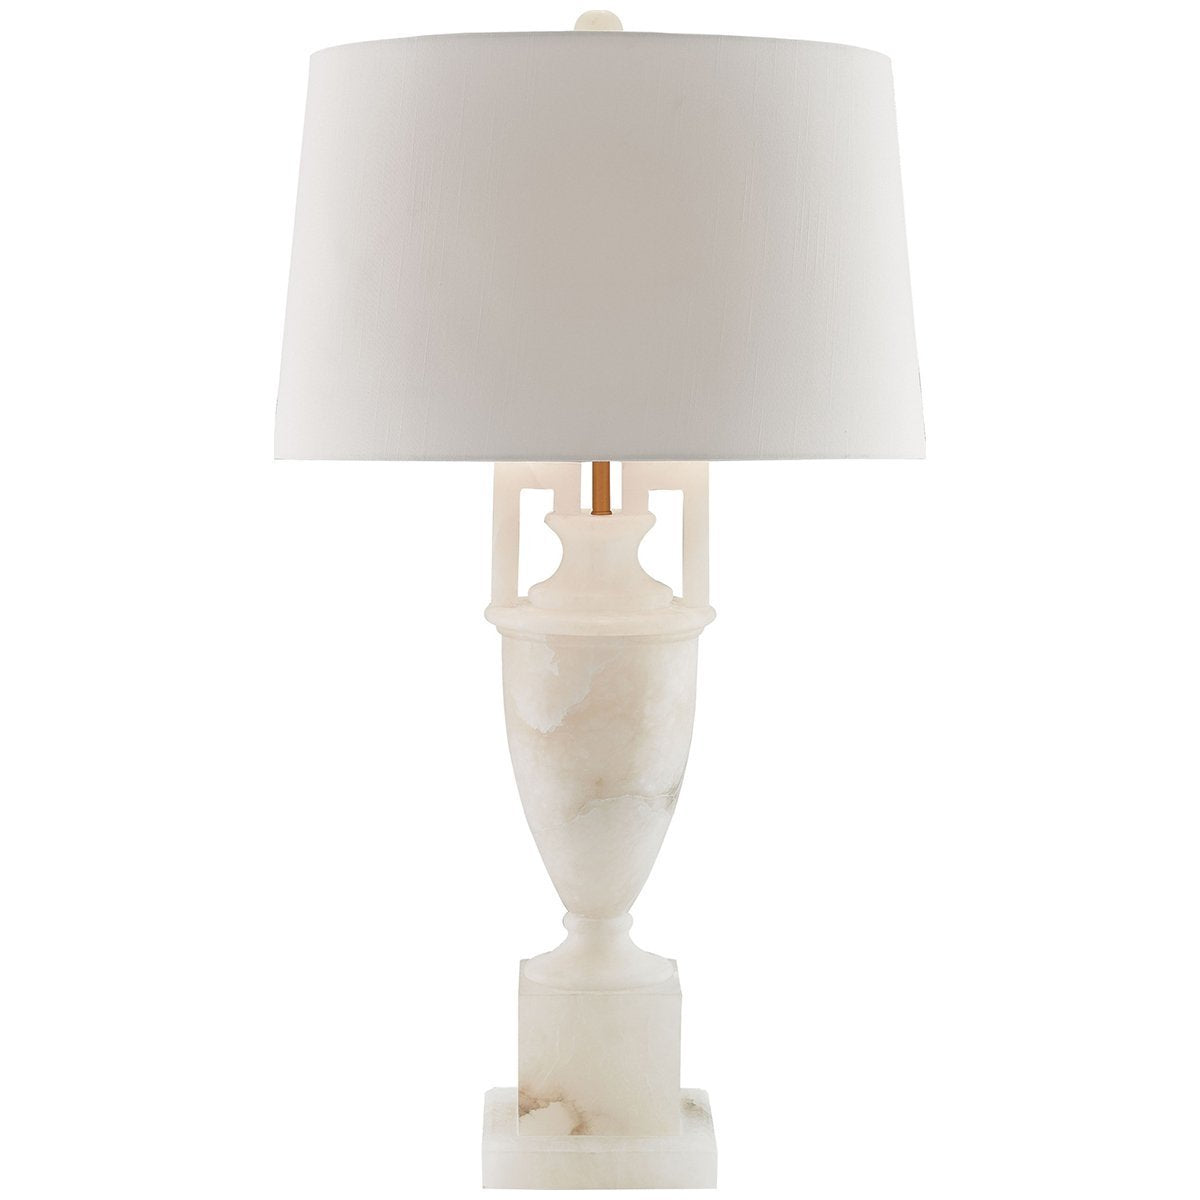 Currey and Company Clifford Table Lamp